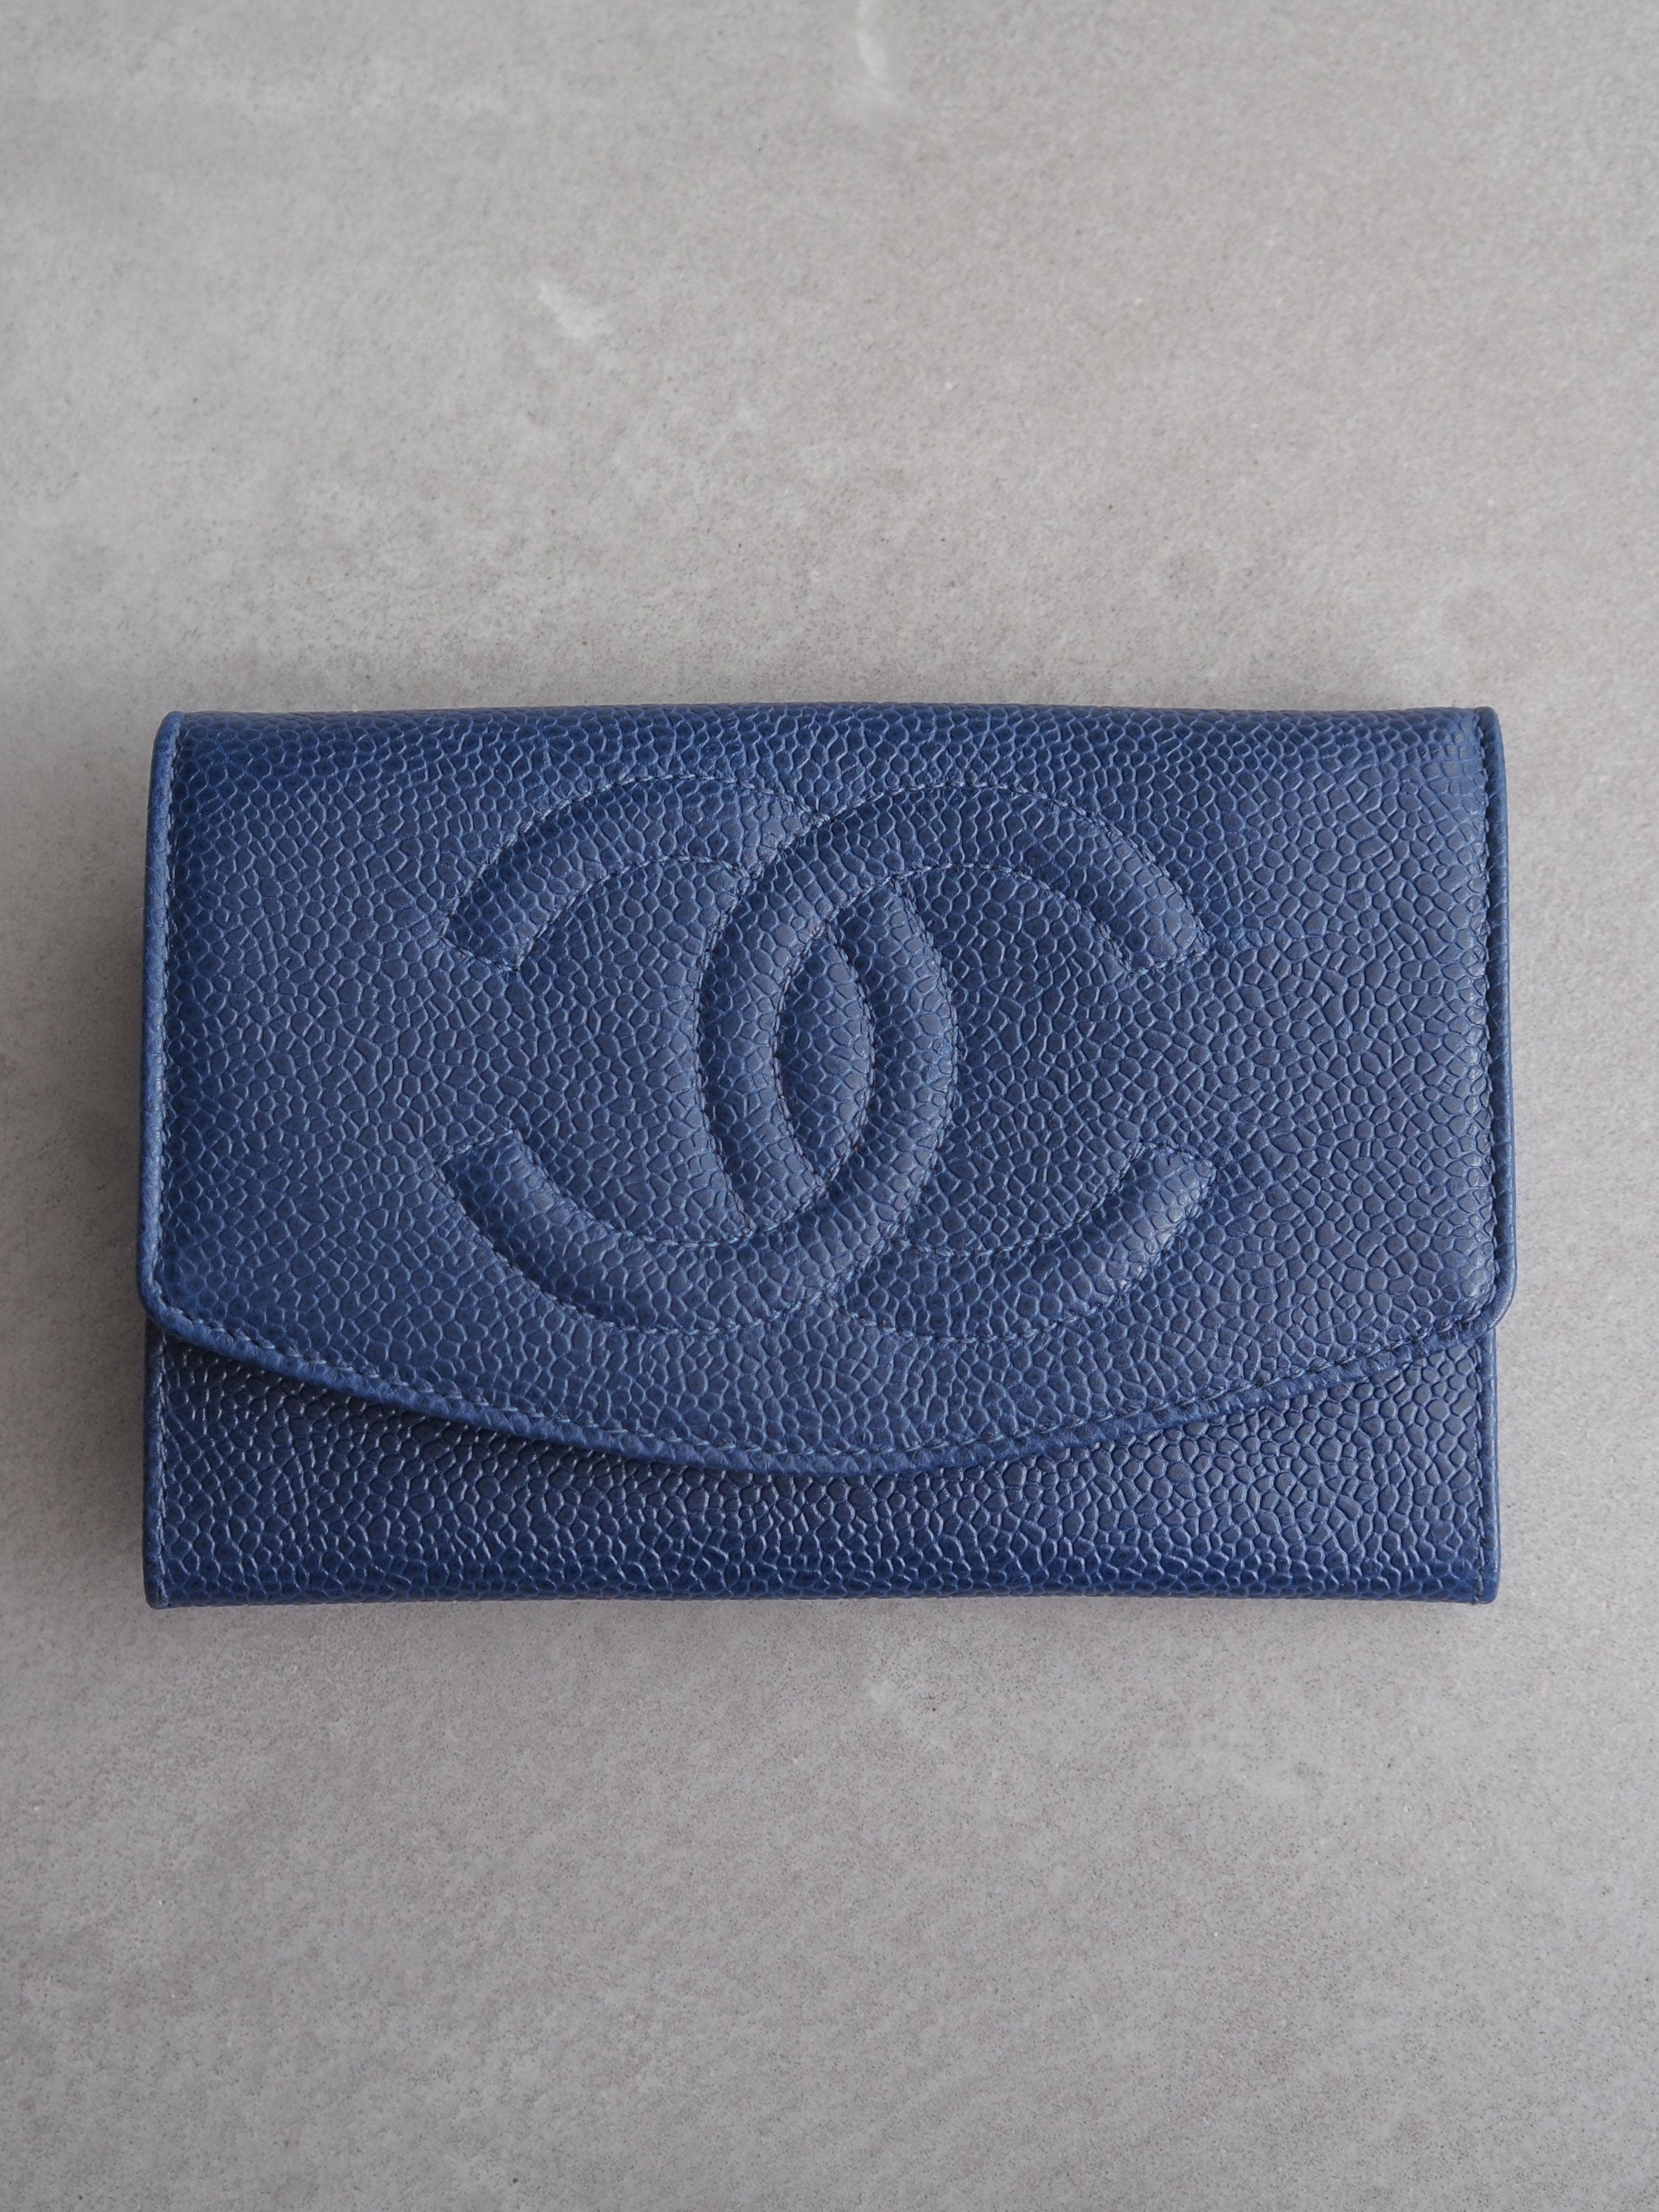 CHANEL COCO Wallet Purse Compact Caviar Skin Leather Blue Authentic Vintage Box